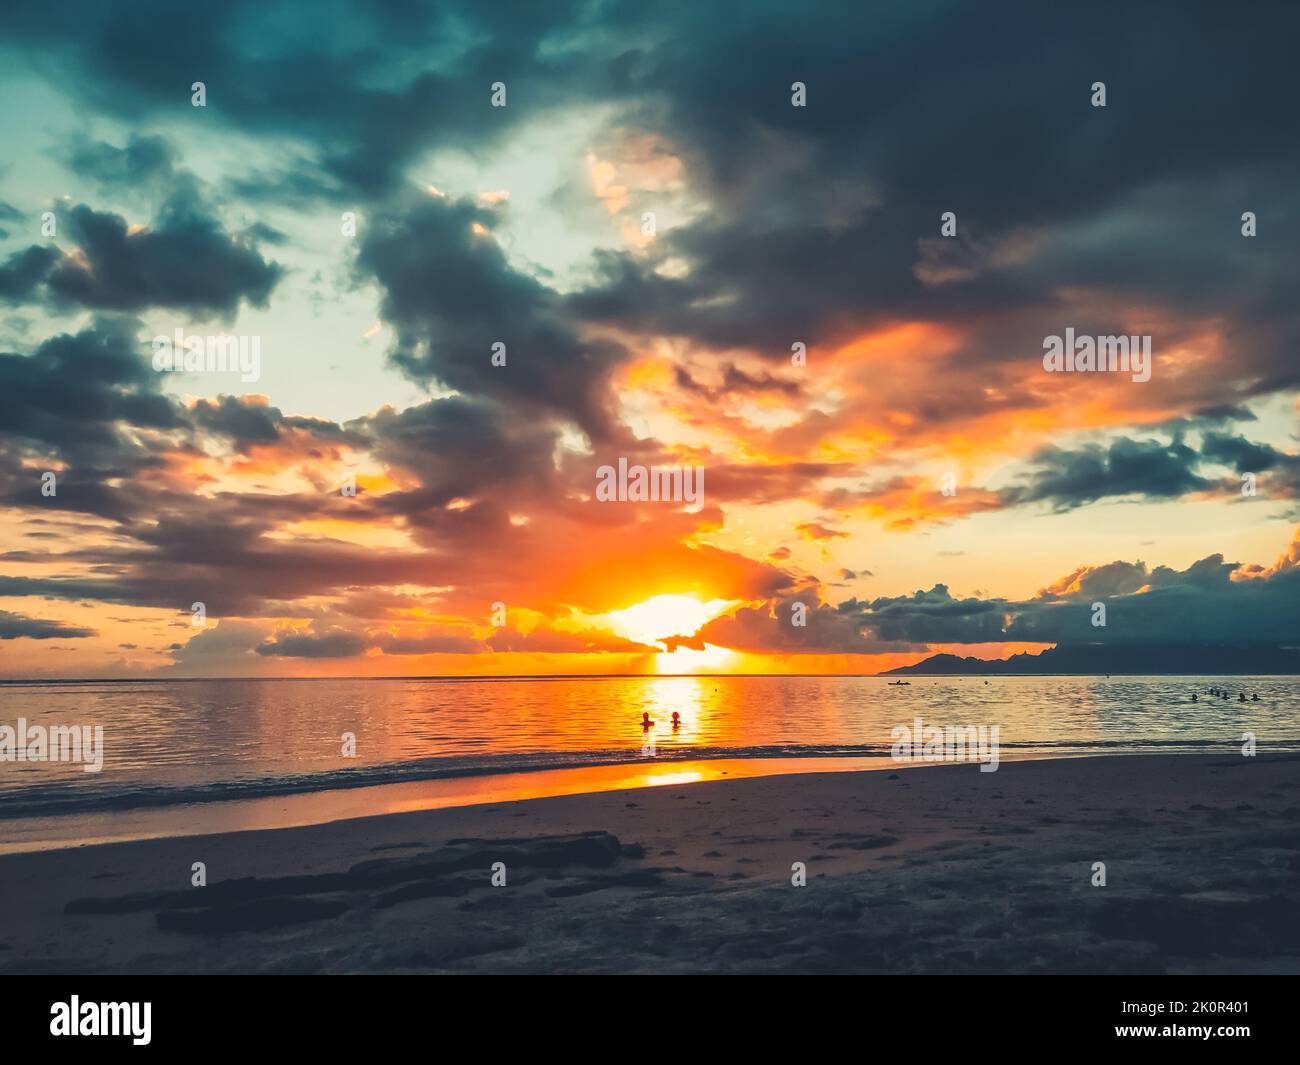 Multi color bright sunset over sea sand beach. People relax and watch sun down landscape. Blue and orange clouds sky. Wonderful nature landscape during sunset. Travel, tourism, adventure concept image Stock Photo